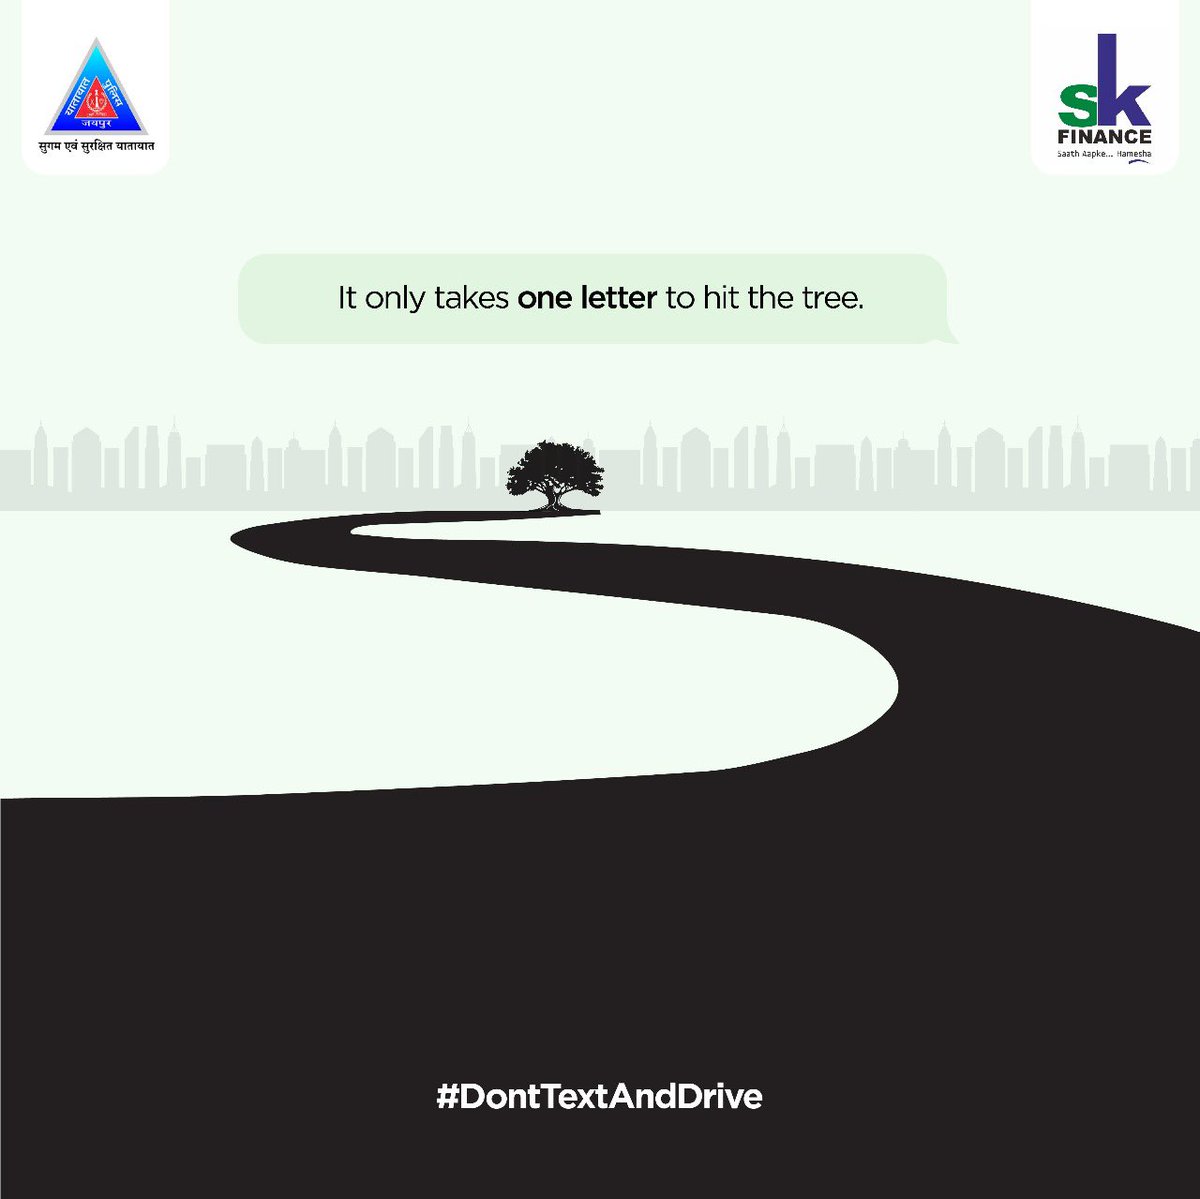 A moment's distraction can cause a lifetime's impact. 🚫📱

Stop texting behind the wheel.

#StaySafe #DontTextWhileDriving #JaipurTrafficPolice #DriveSafely #SafetyFirst #FollowTrafficRules